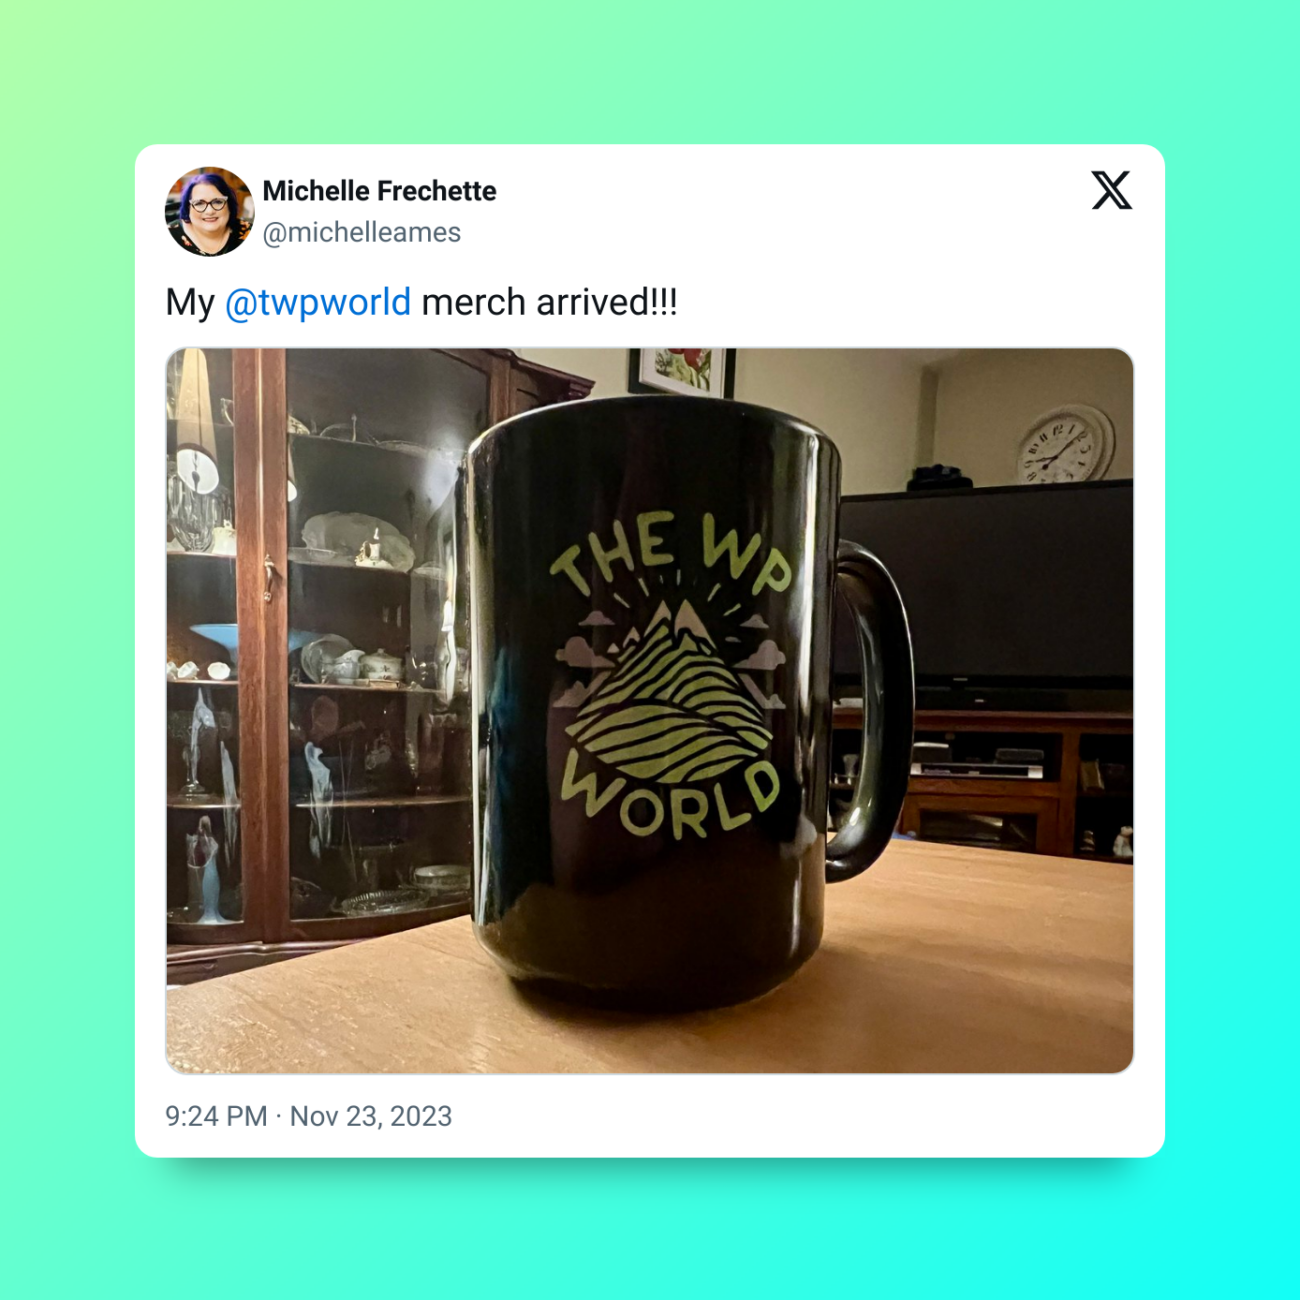 Tweet from Michelle Frechette that says "My @twpworld merch arrived" and includes a photo of her The WP World mug